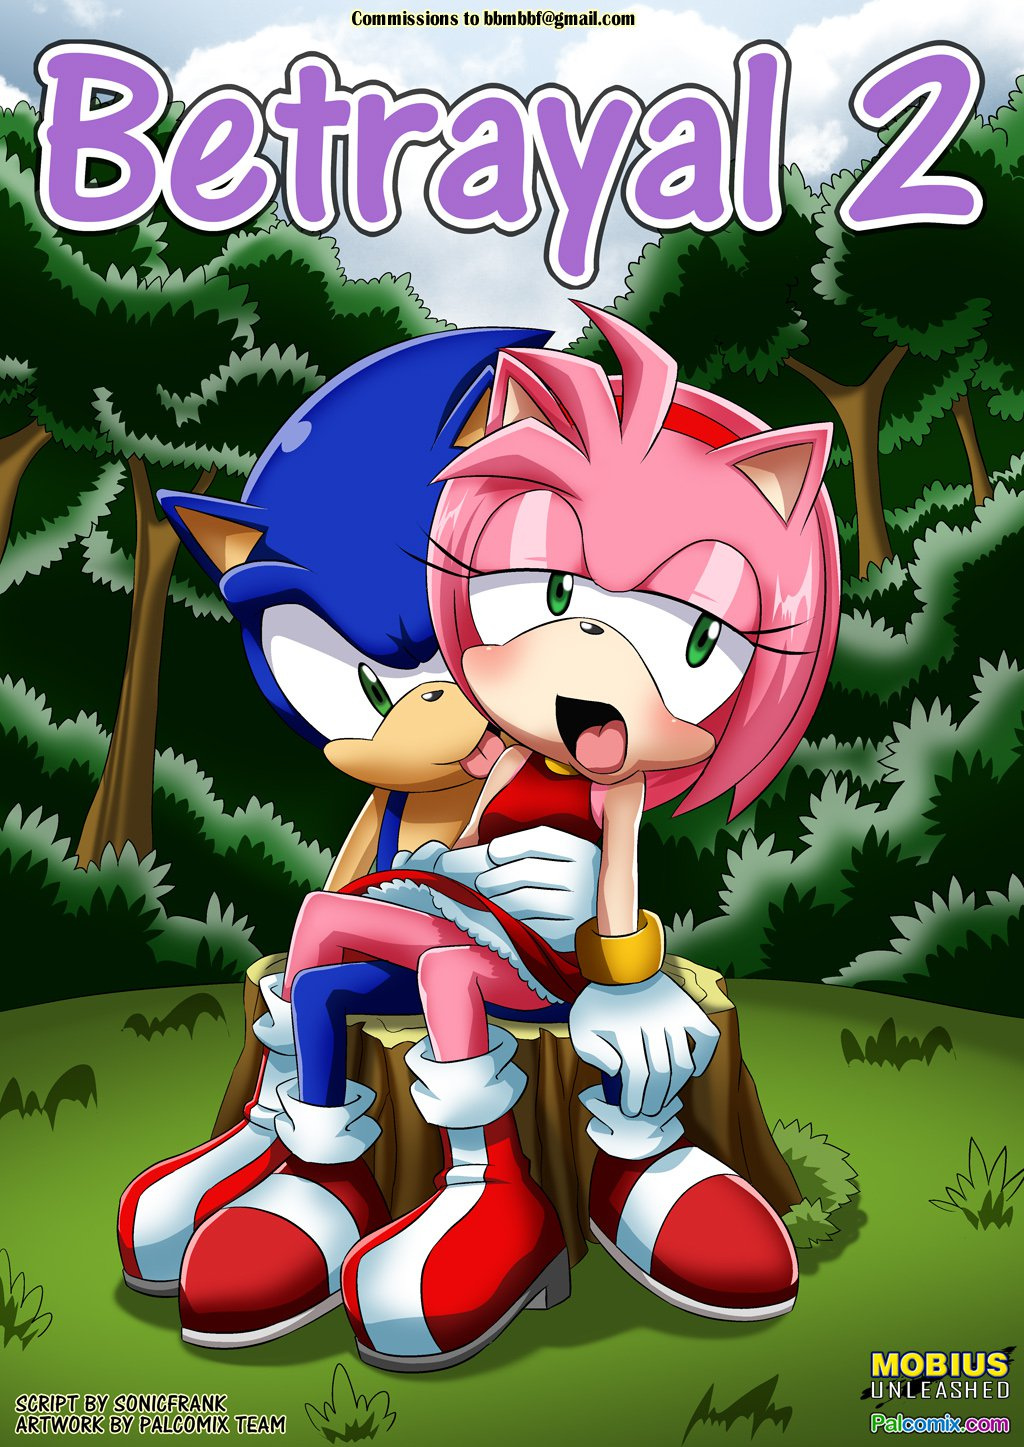 Sonic and amy hentai